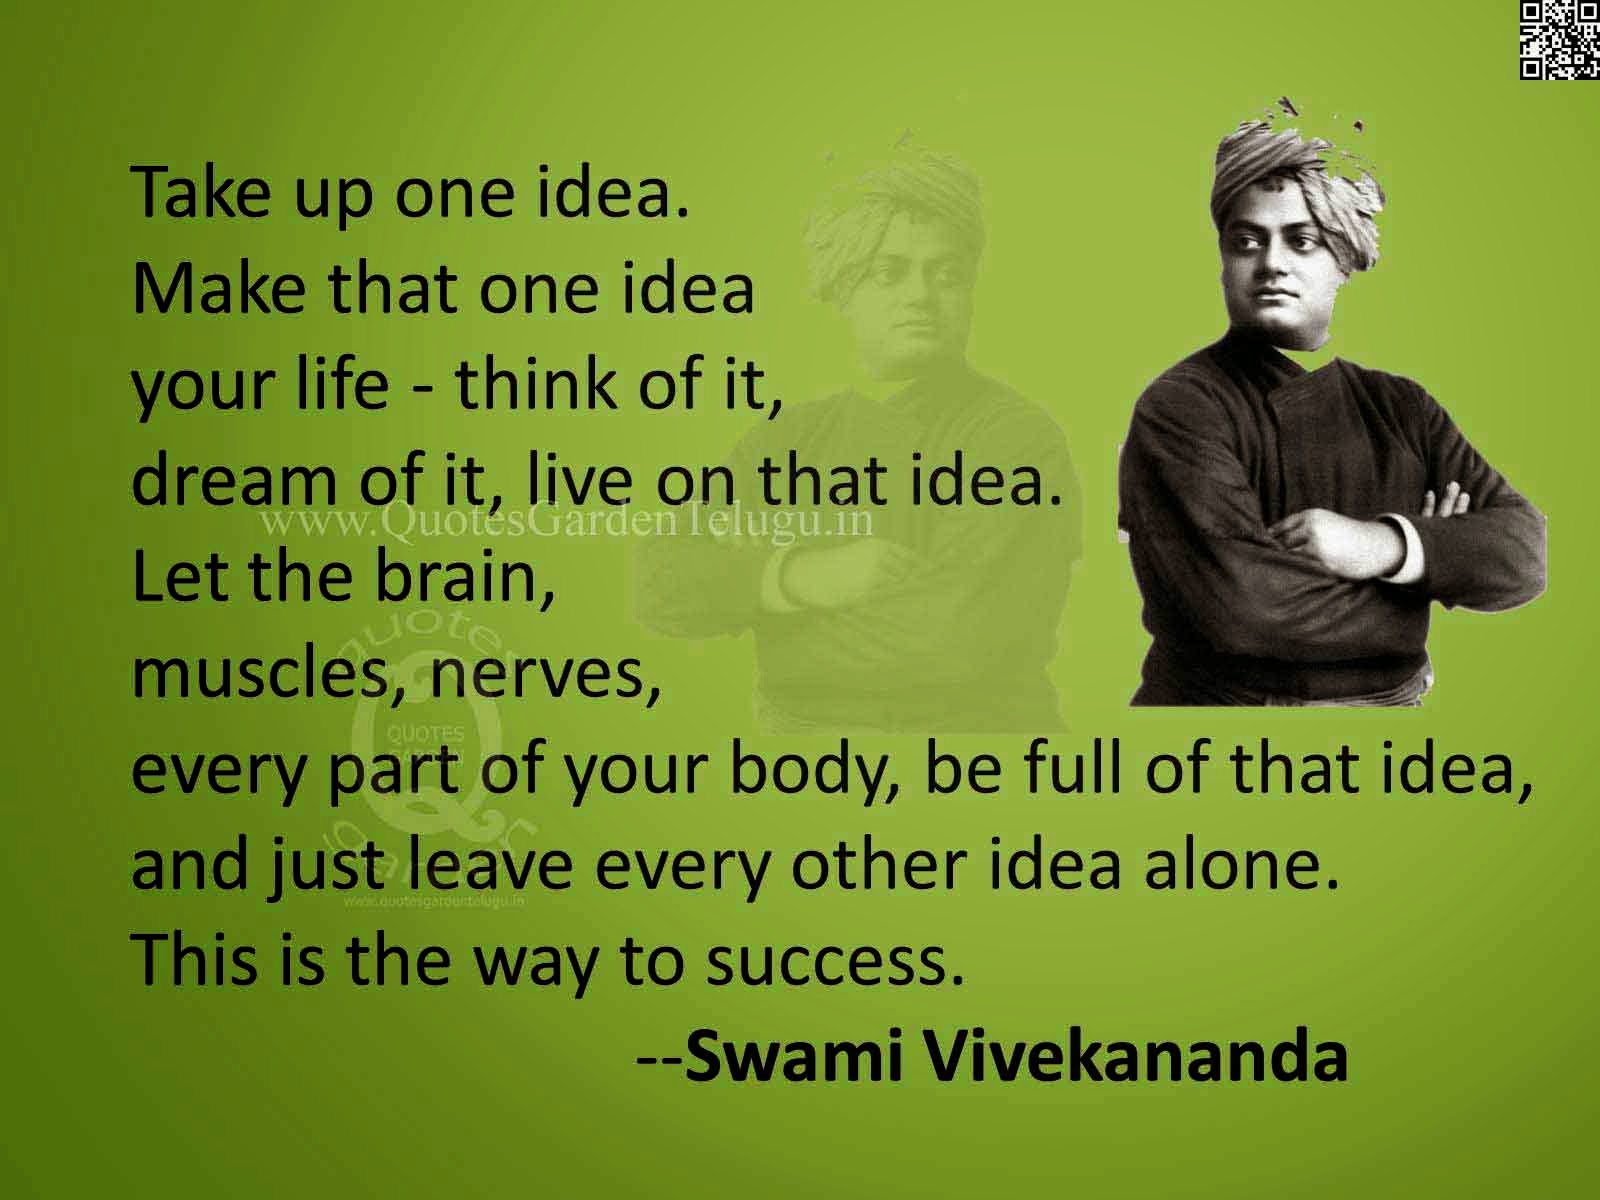 Best Famous Vivekananda English Quotes with images 0803156 | QUOTES GARDEN  TELUGU | Telugu Quotes | English Quotes | Hindi Quotes |